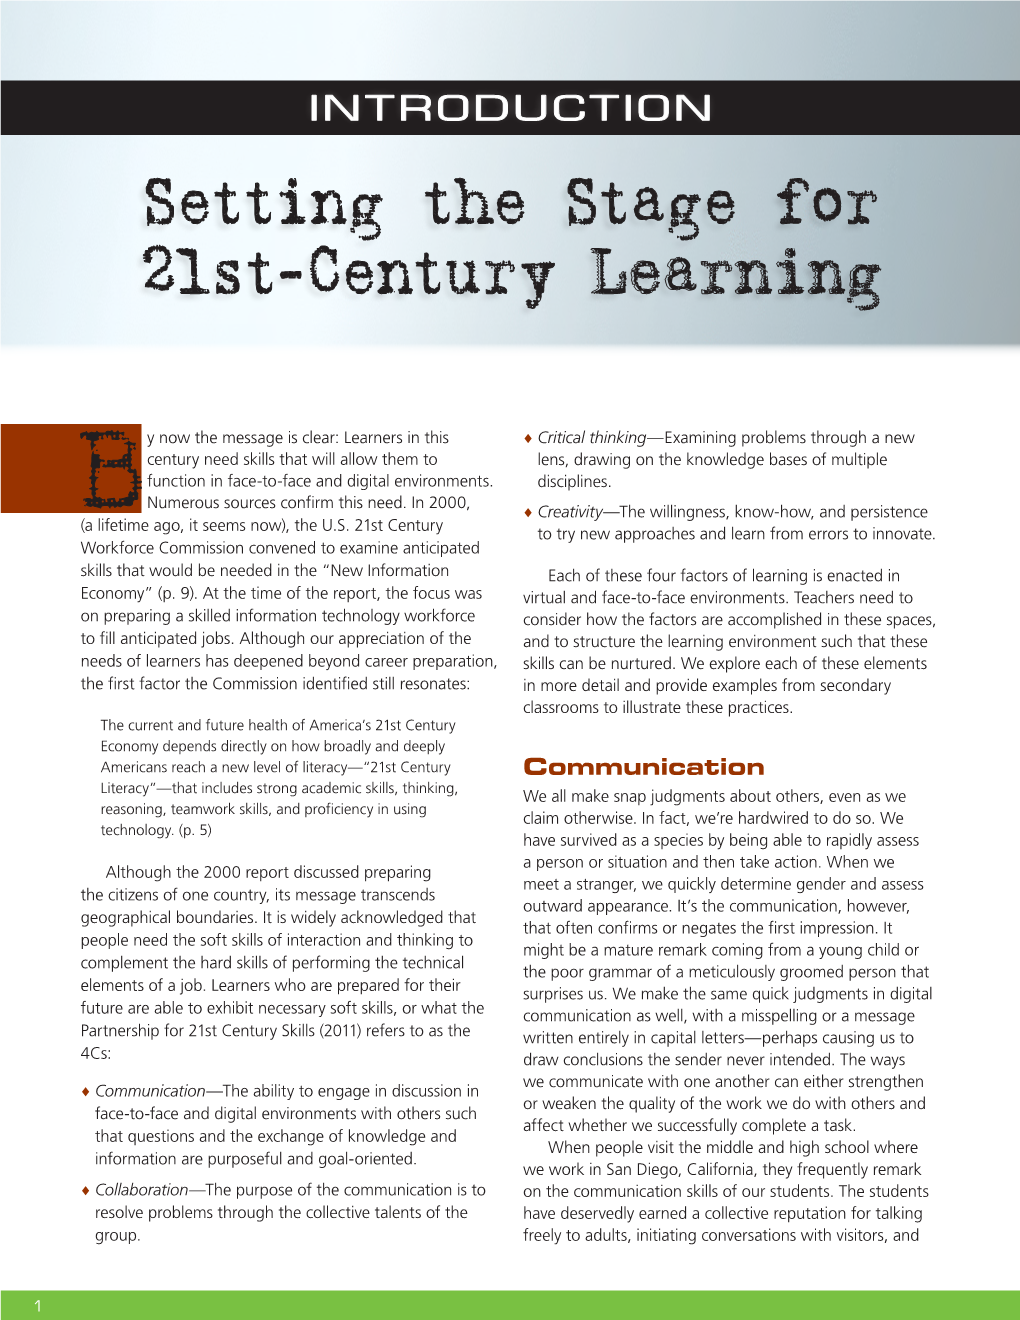 Setting the Stage for 21St-Century Learning